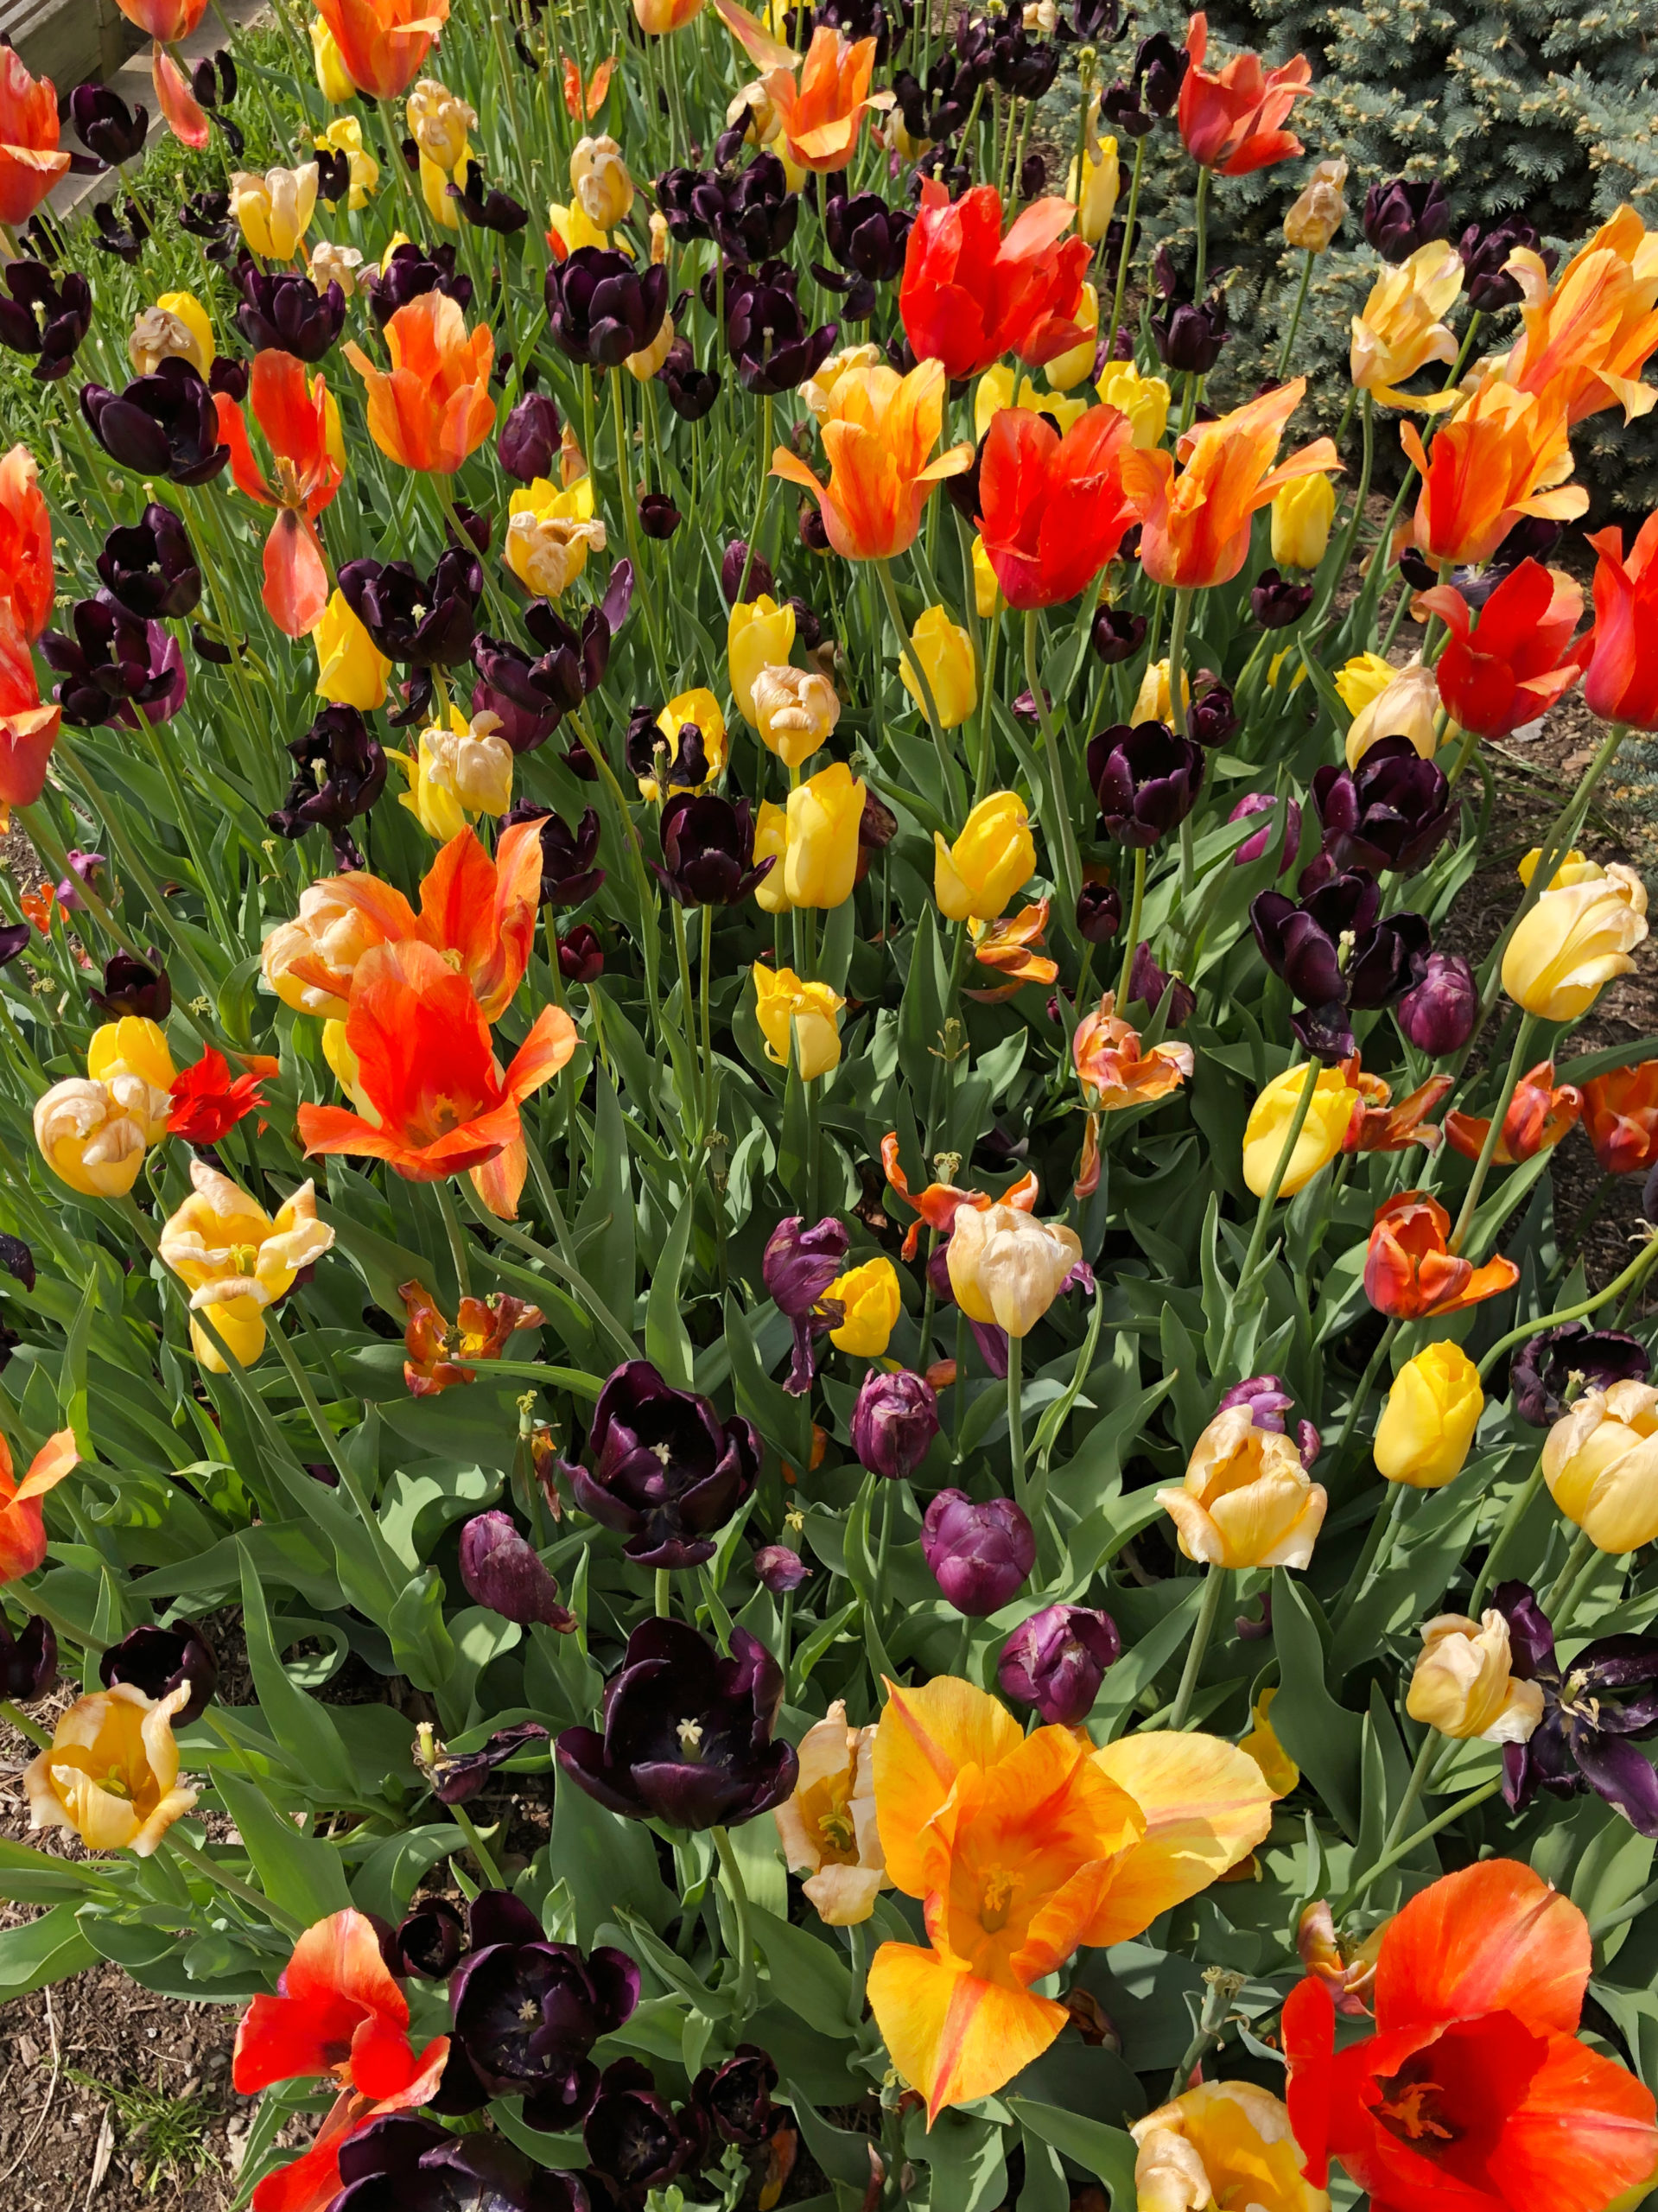 A bed of colorful spring bulbs in a garden.